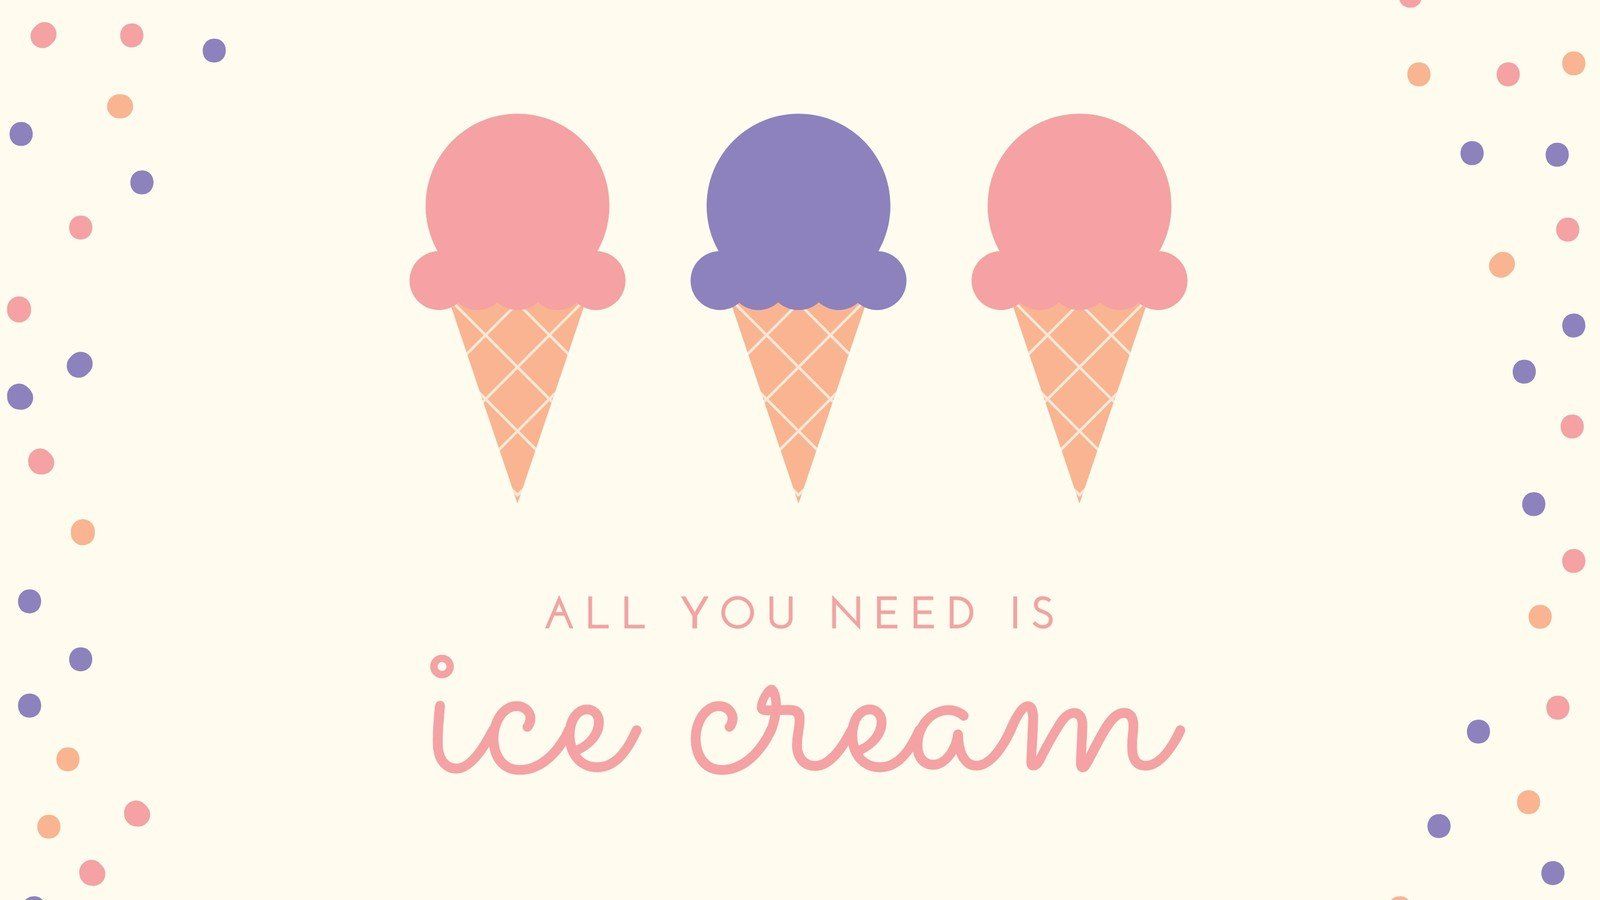 All you need is ice cream, with three cones on a light yellow background - Ice cream